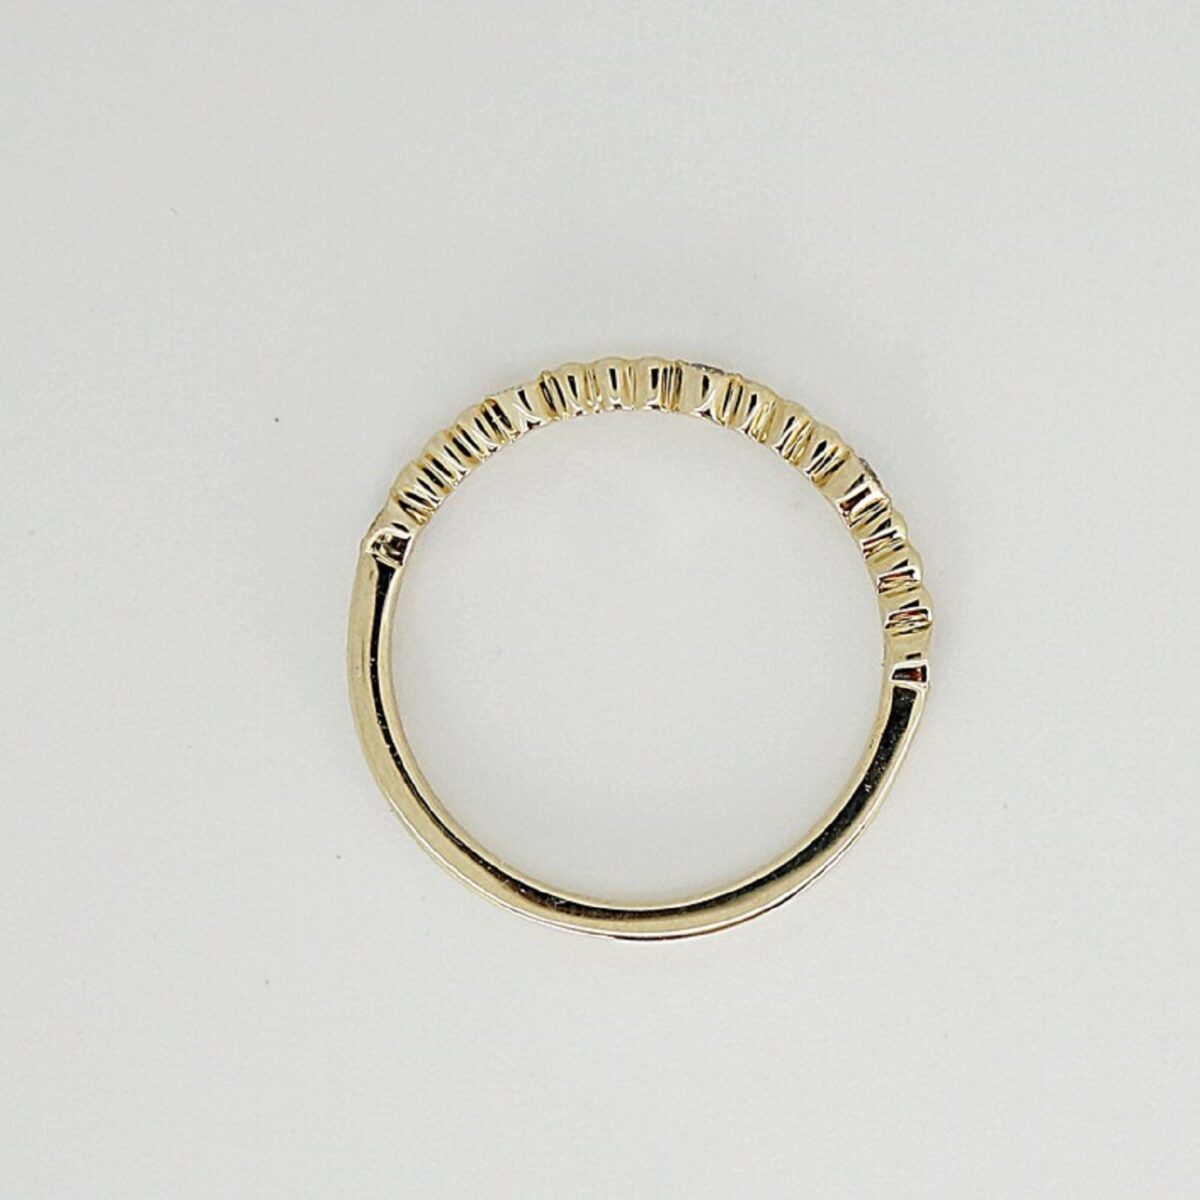 Unique round cut lab grown diamond stacking that milgrain setting around diamond and set between gold bead. This crafted in 14k yellow gold.